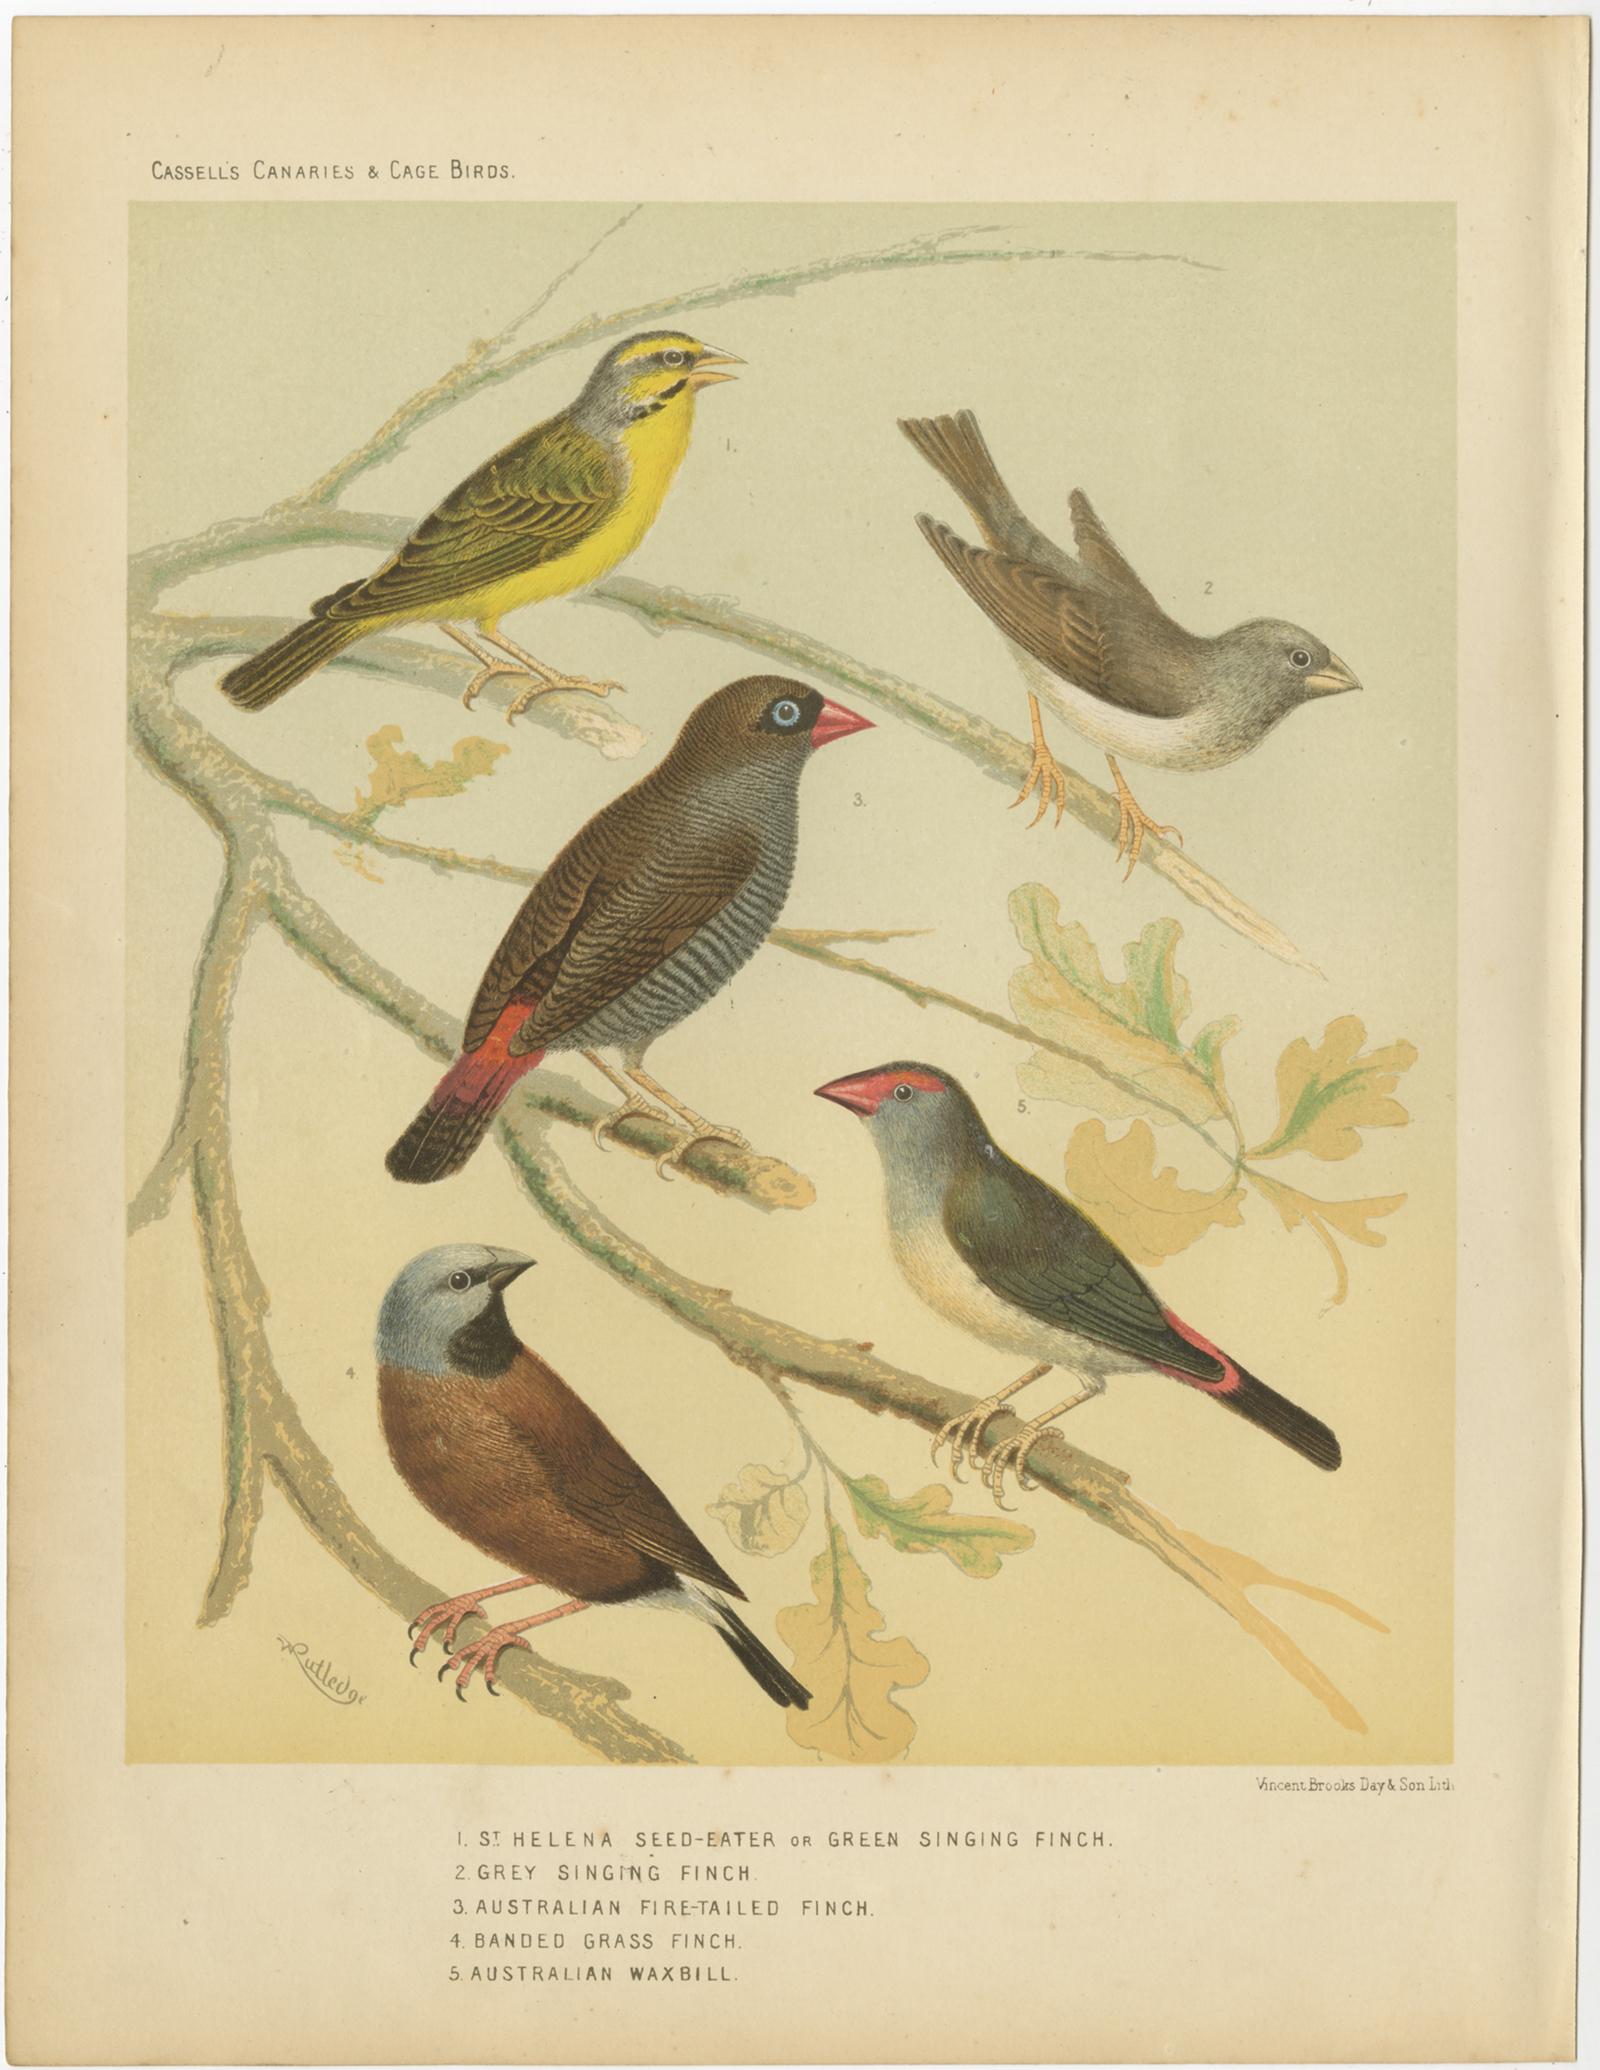 Antique bird print titled '1. St Helena Seed-Eater or Green Singing Finch 2. Grey Singing Finch 3. Australian Fire-Tailed Finch 4. Banded Grass Finch' Old bird print depicting the Green Singing Finch, Grey Singing Finch, Australian Fire-Tailed